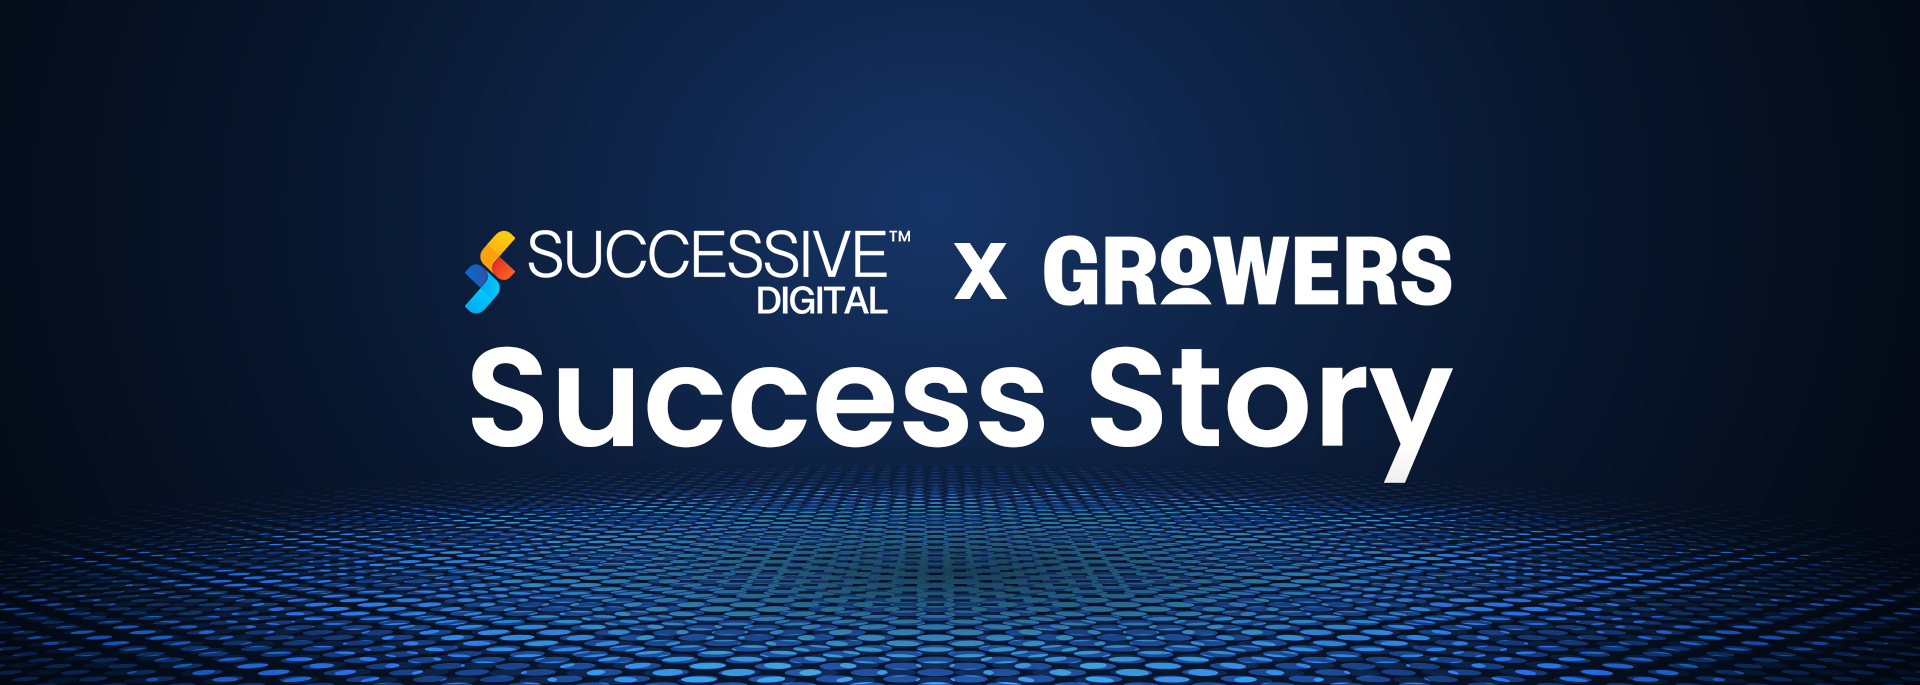 Successive Digital X Growers: Advancing Agricultural Supply Chain Solutions